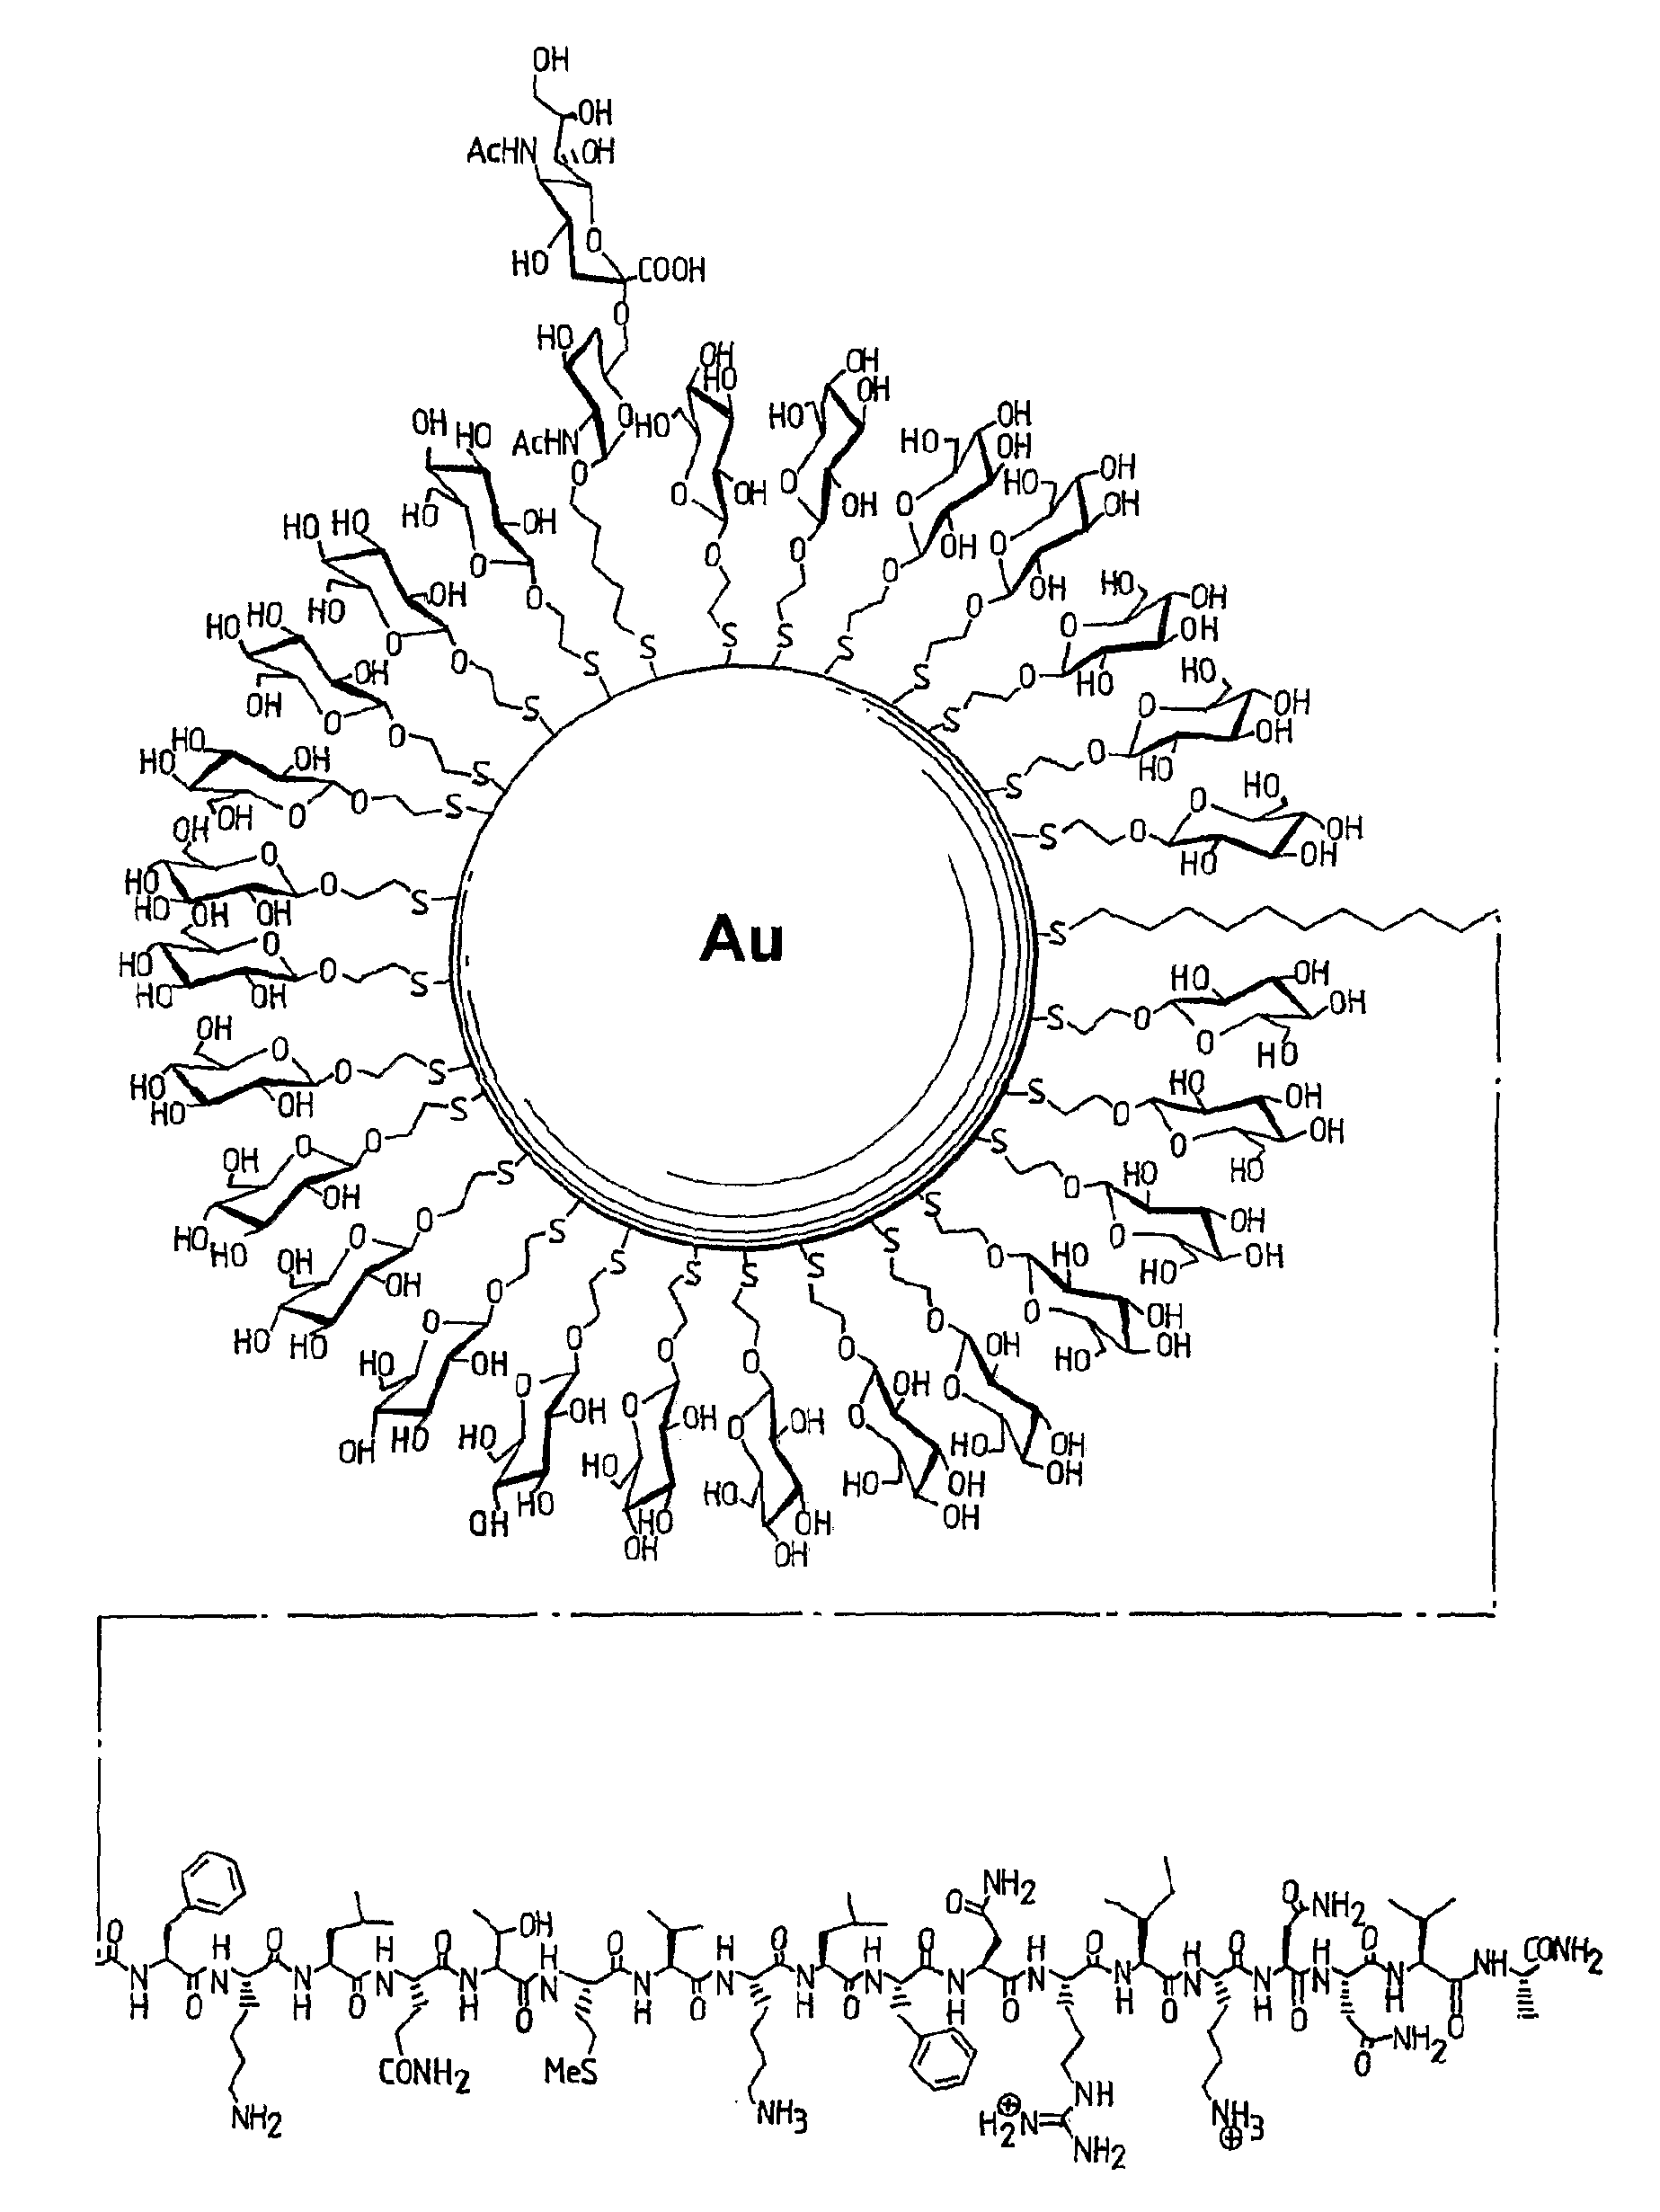 Nanoparticles Comprising Antigens and Adjuvants, and Immunogenic Structures